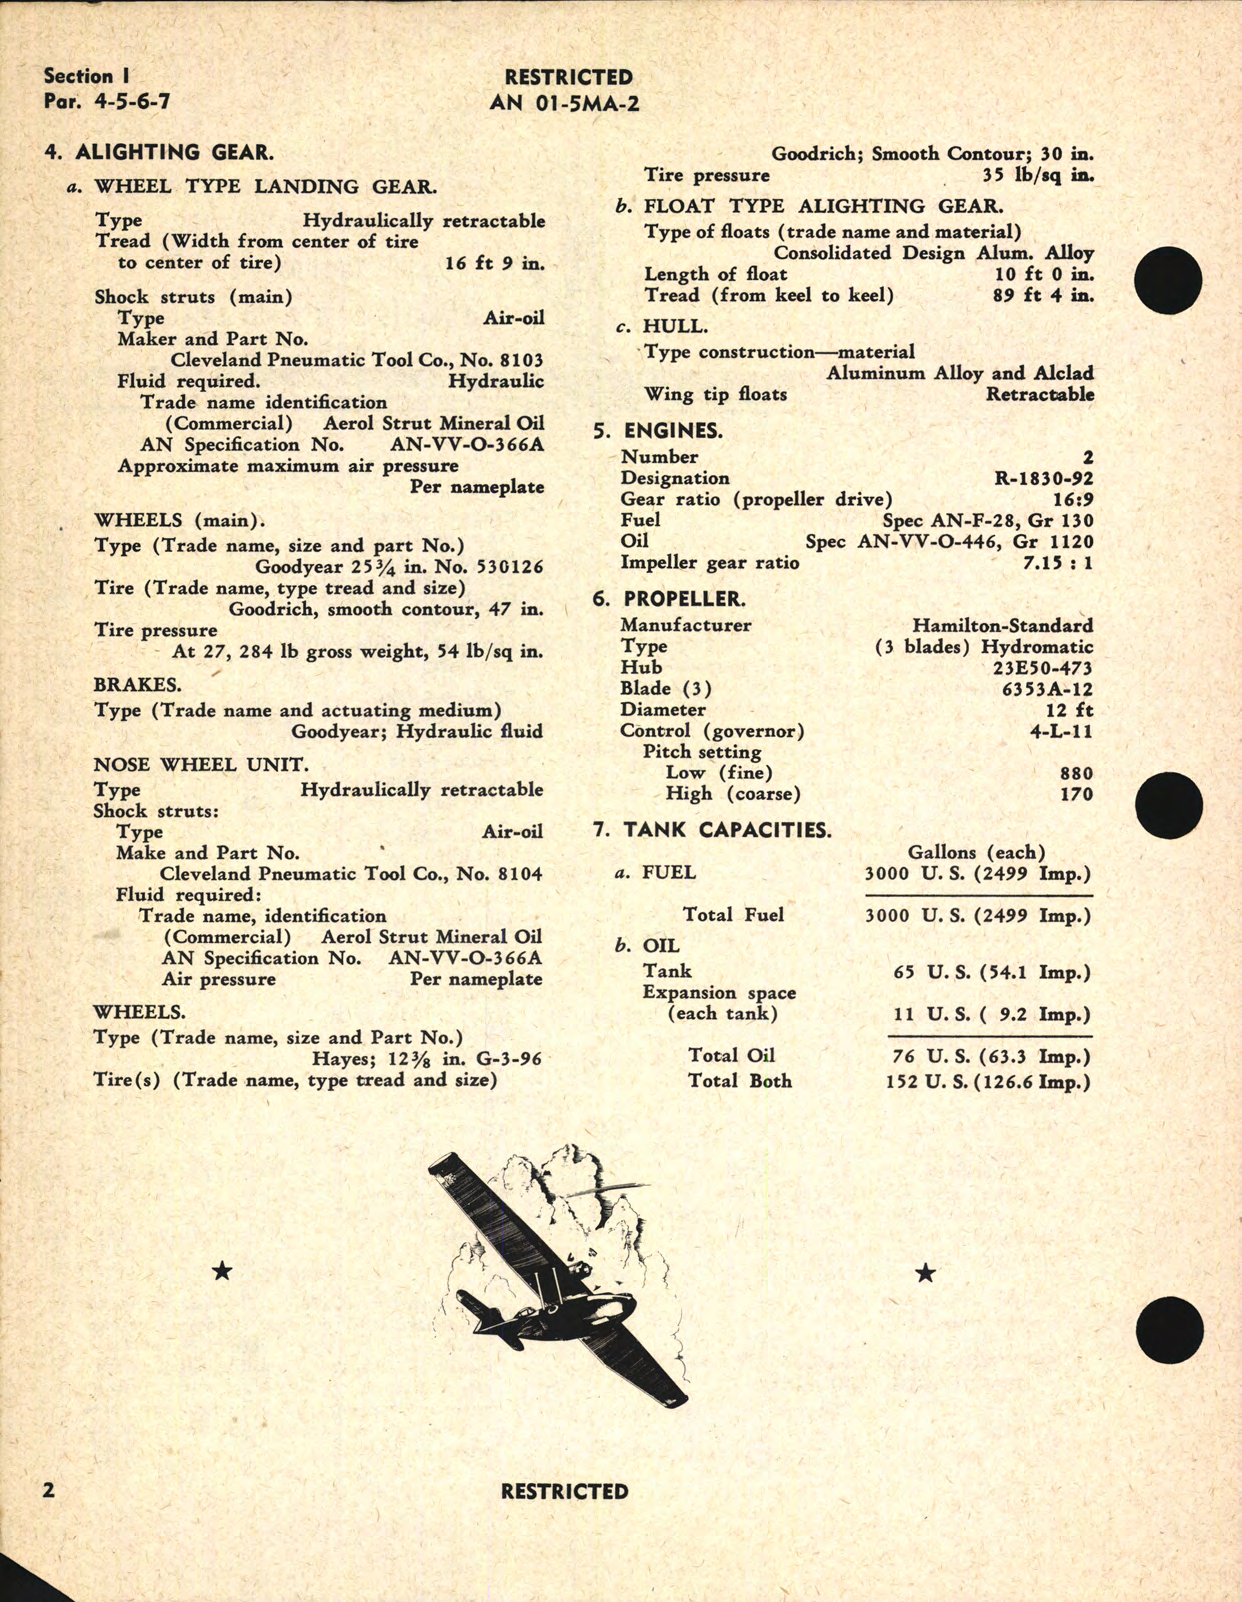 Sample page 8 from AirCorps Library document: Erection & Maintenance Instructions for PBY-5A Airplanes